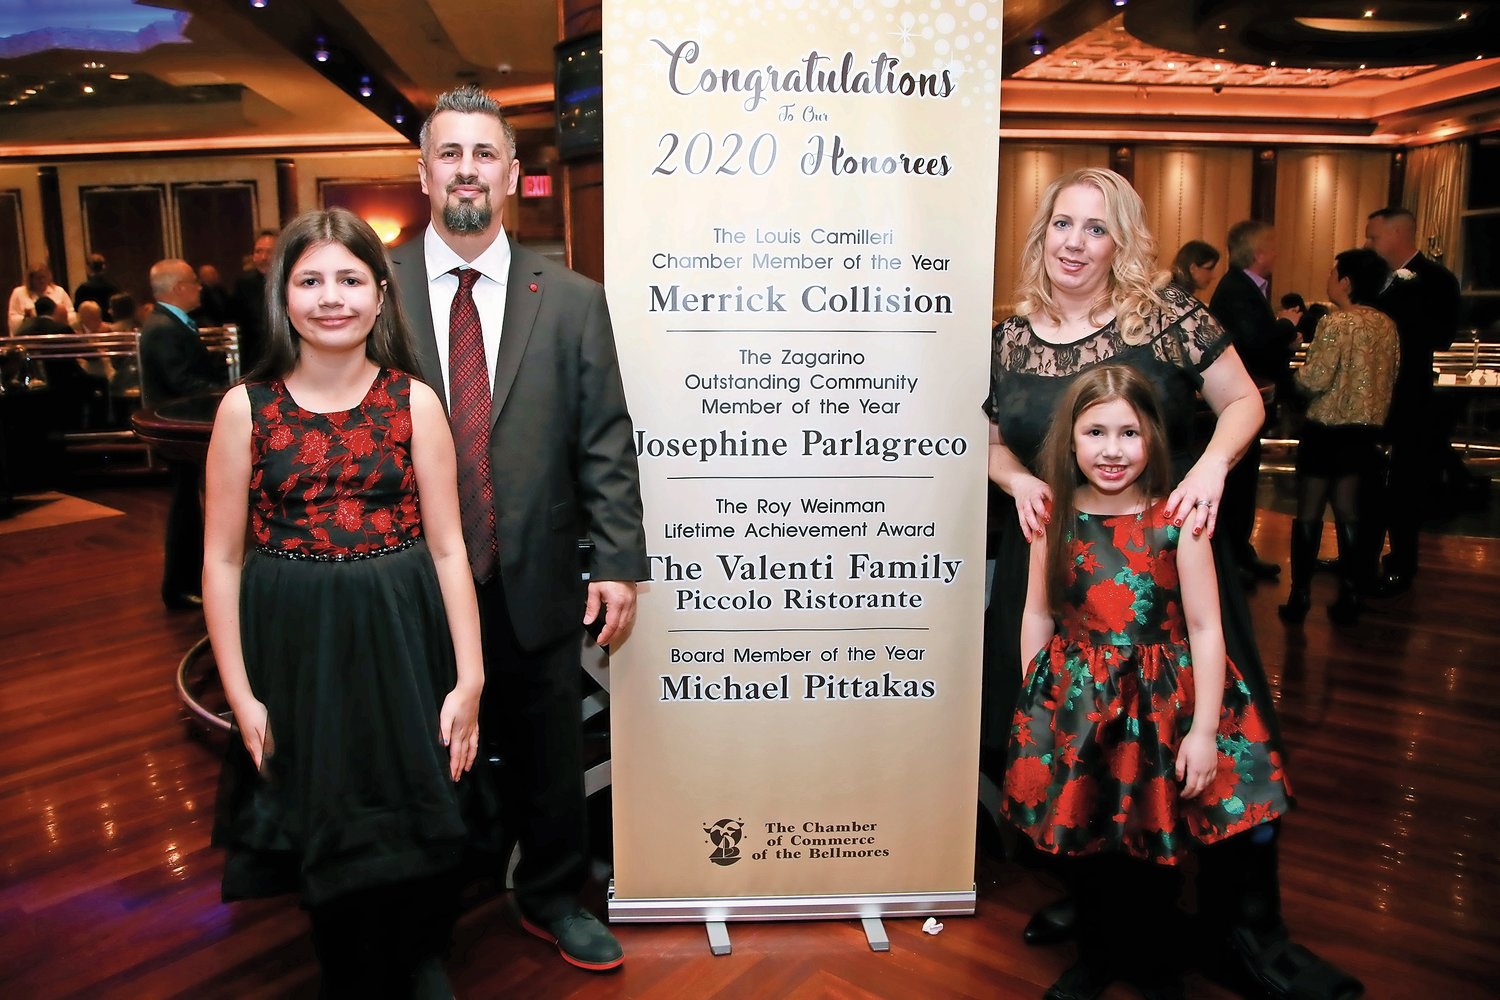 Board Member of the Year Michael Pittakas, second from left, with his wife Rosanna, right, and daughters Sofia, left, and Annabella.